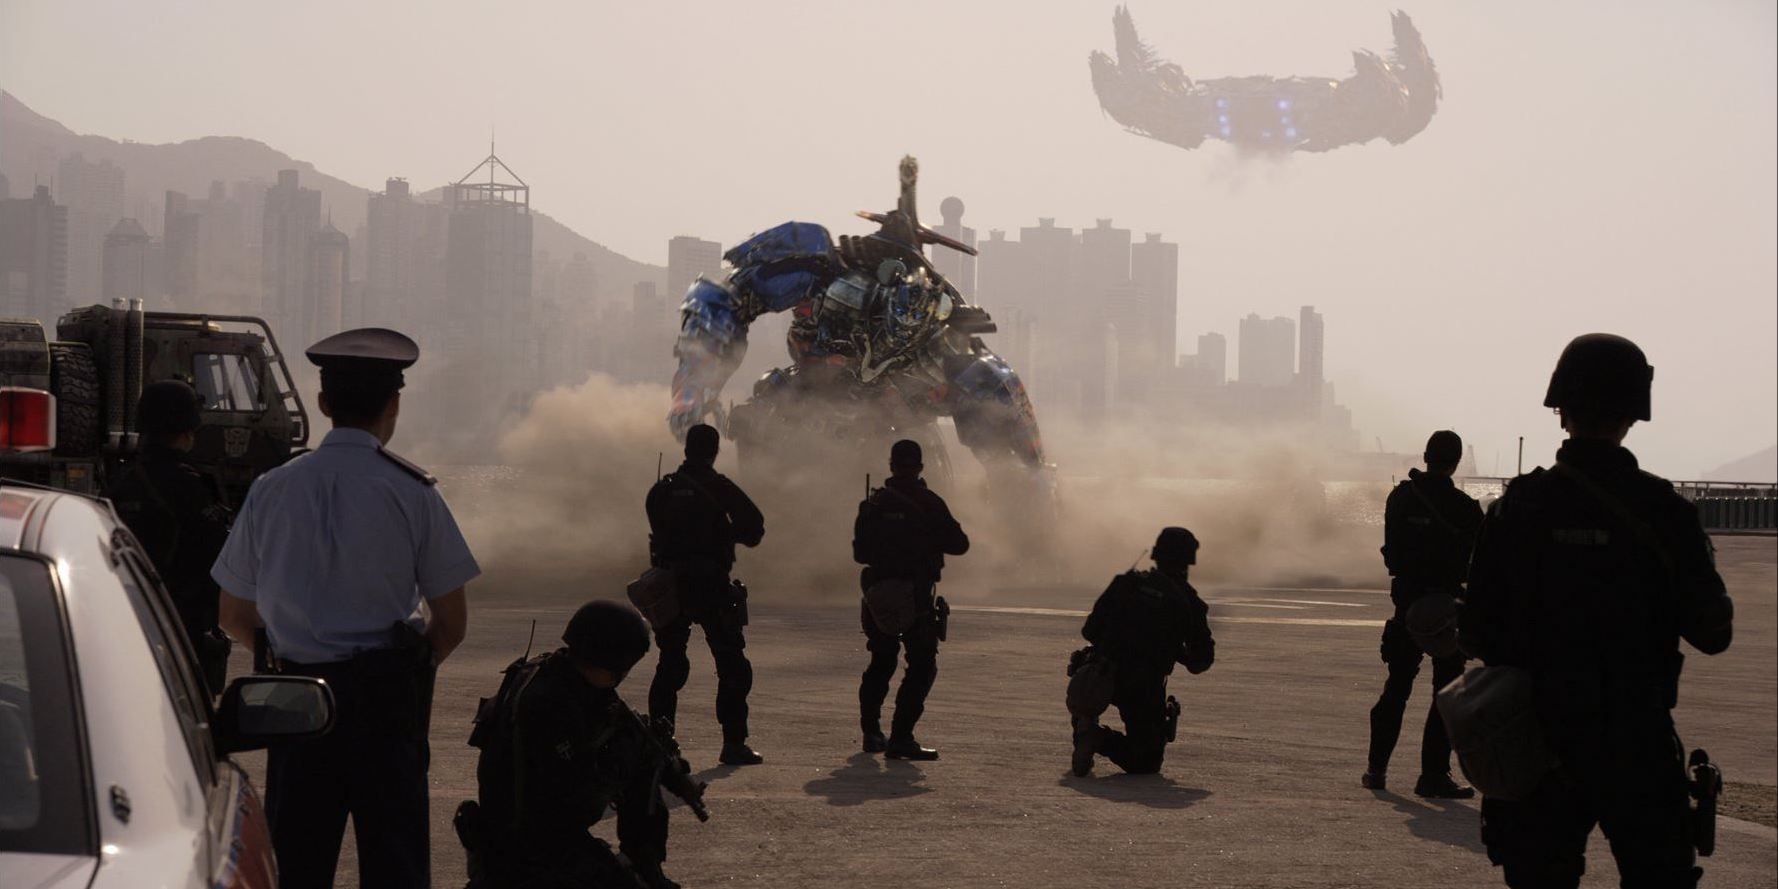 The 10 Best Action Sequences From The Transformers Franchise Ranked